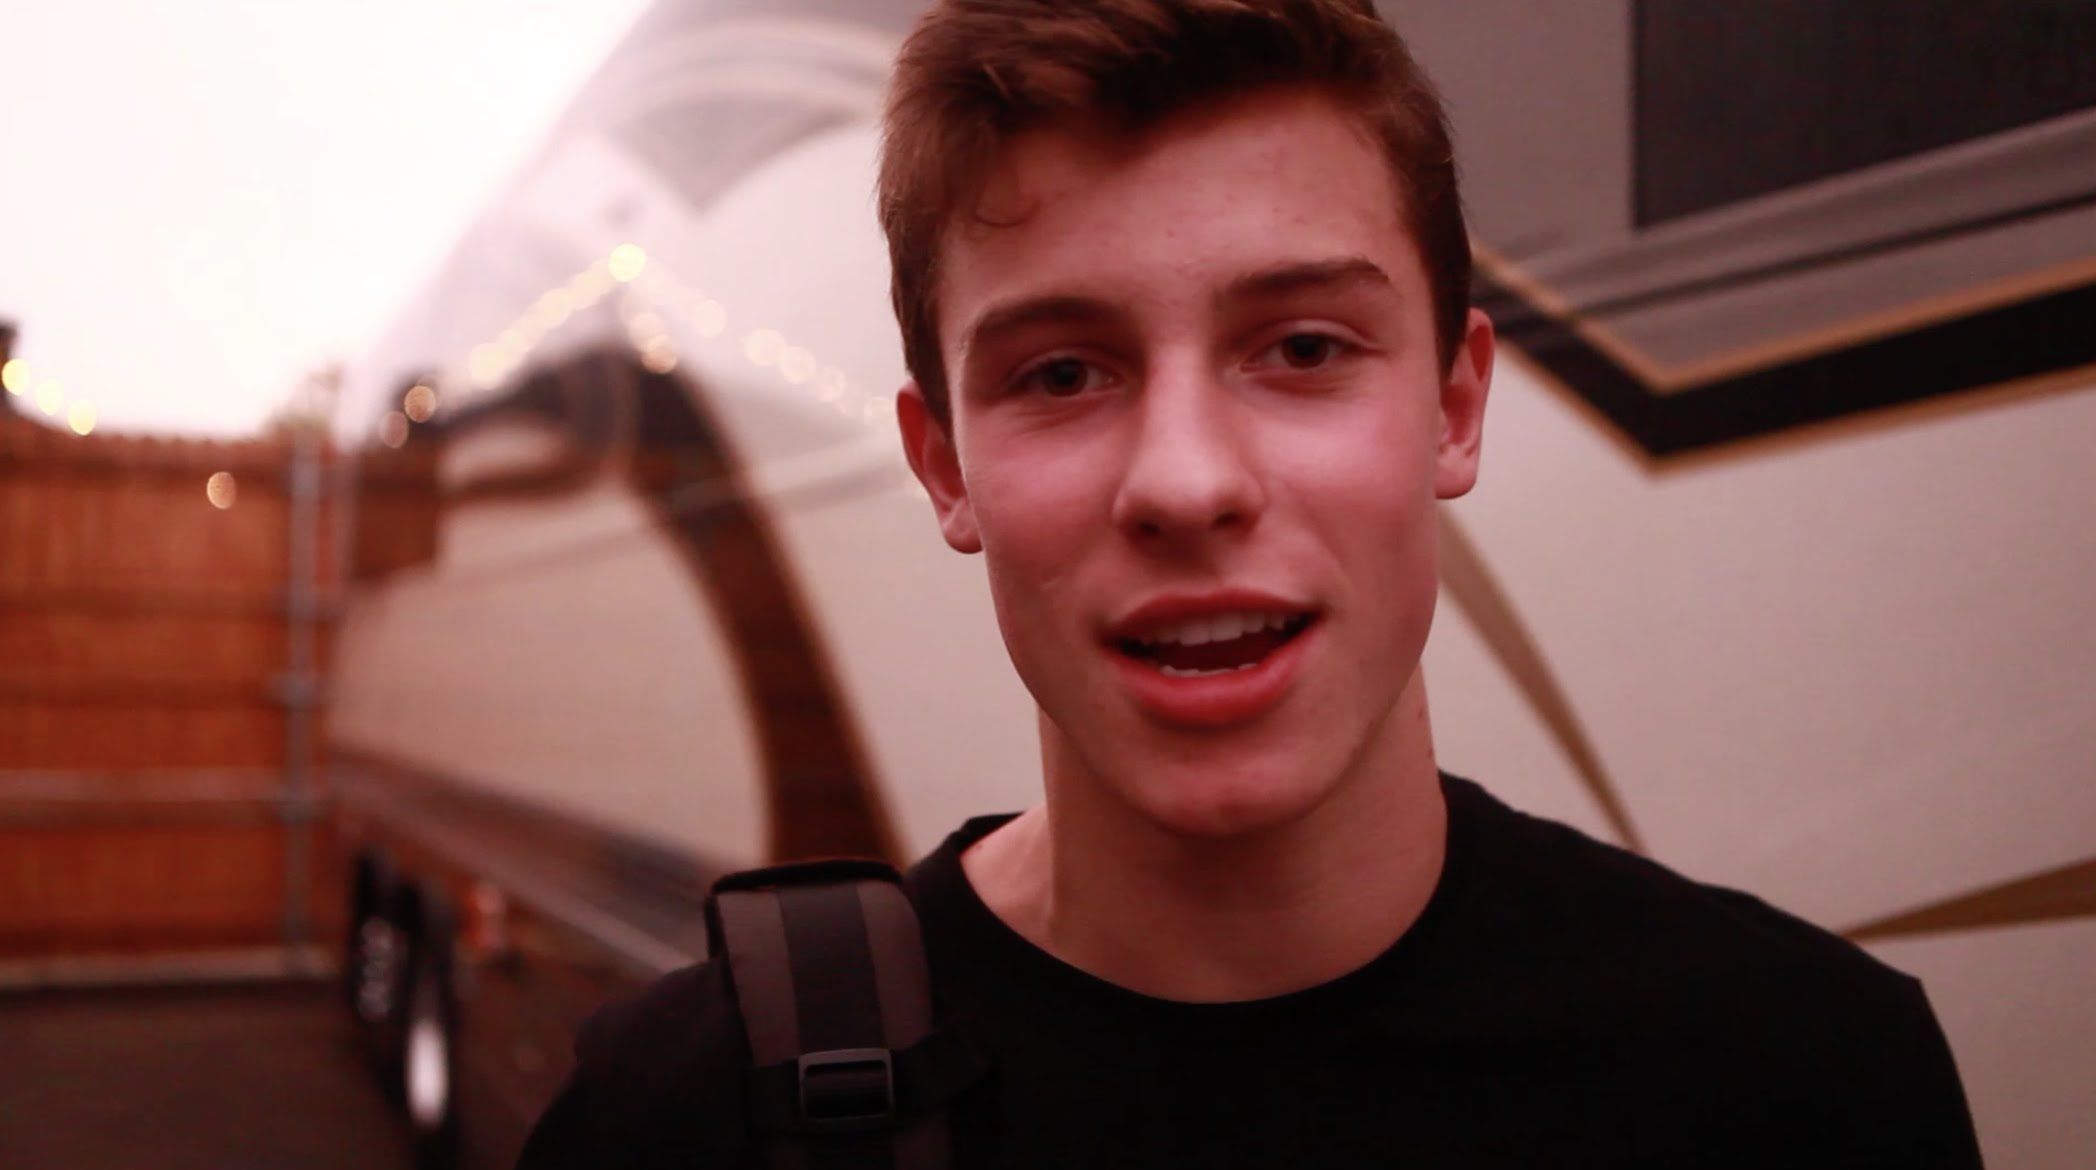 Shawn Mendes – “Life On The Road” Episode III